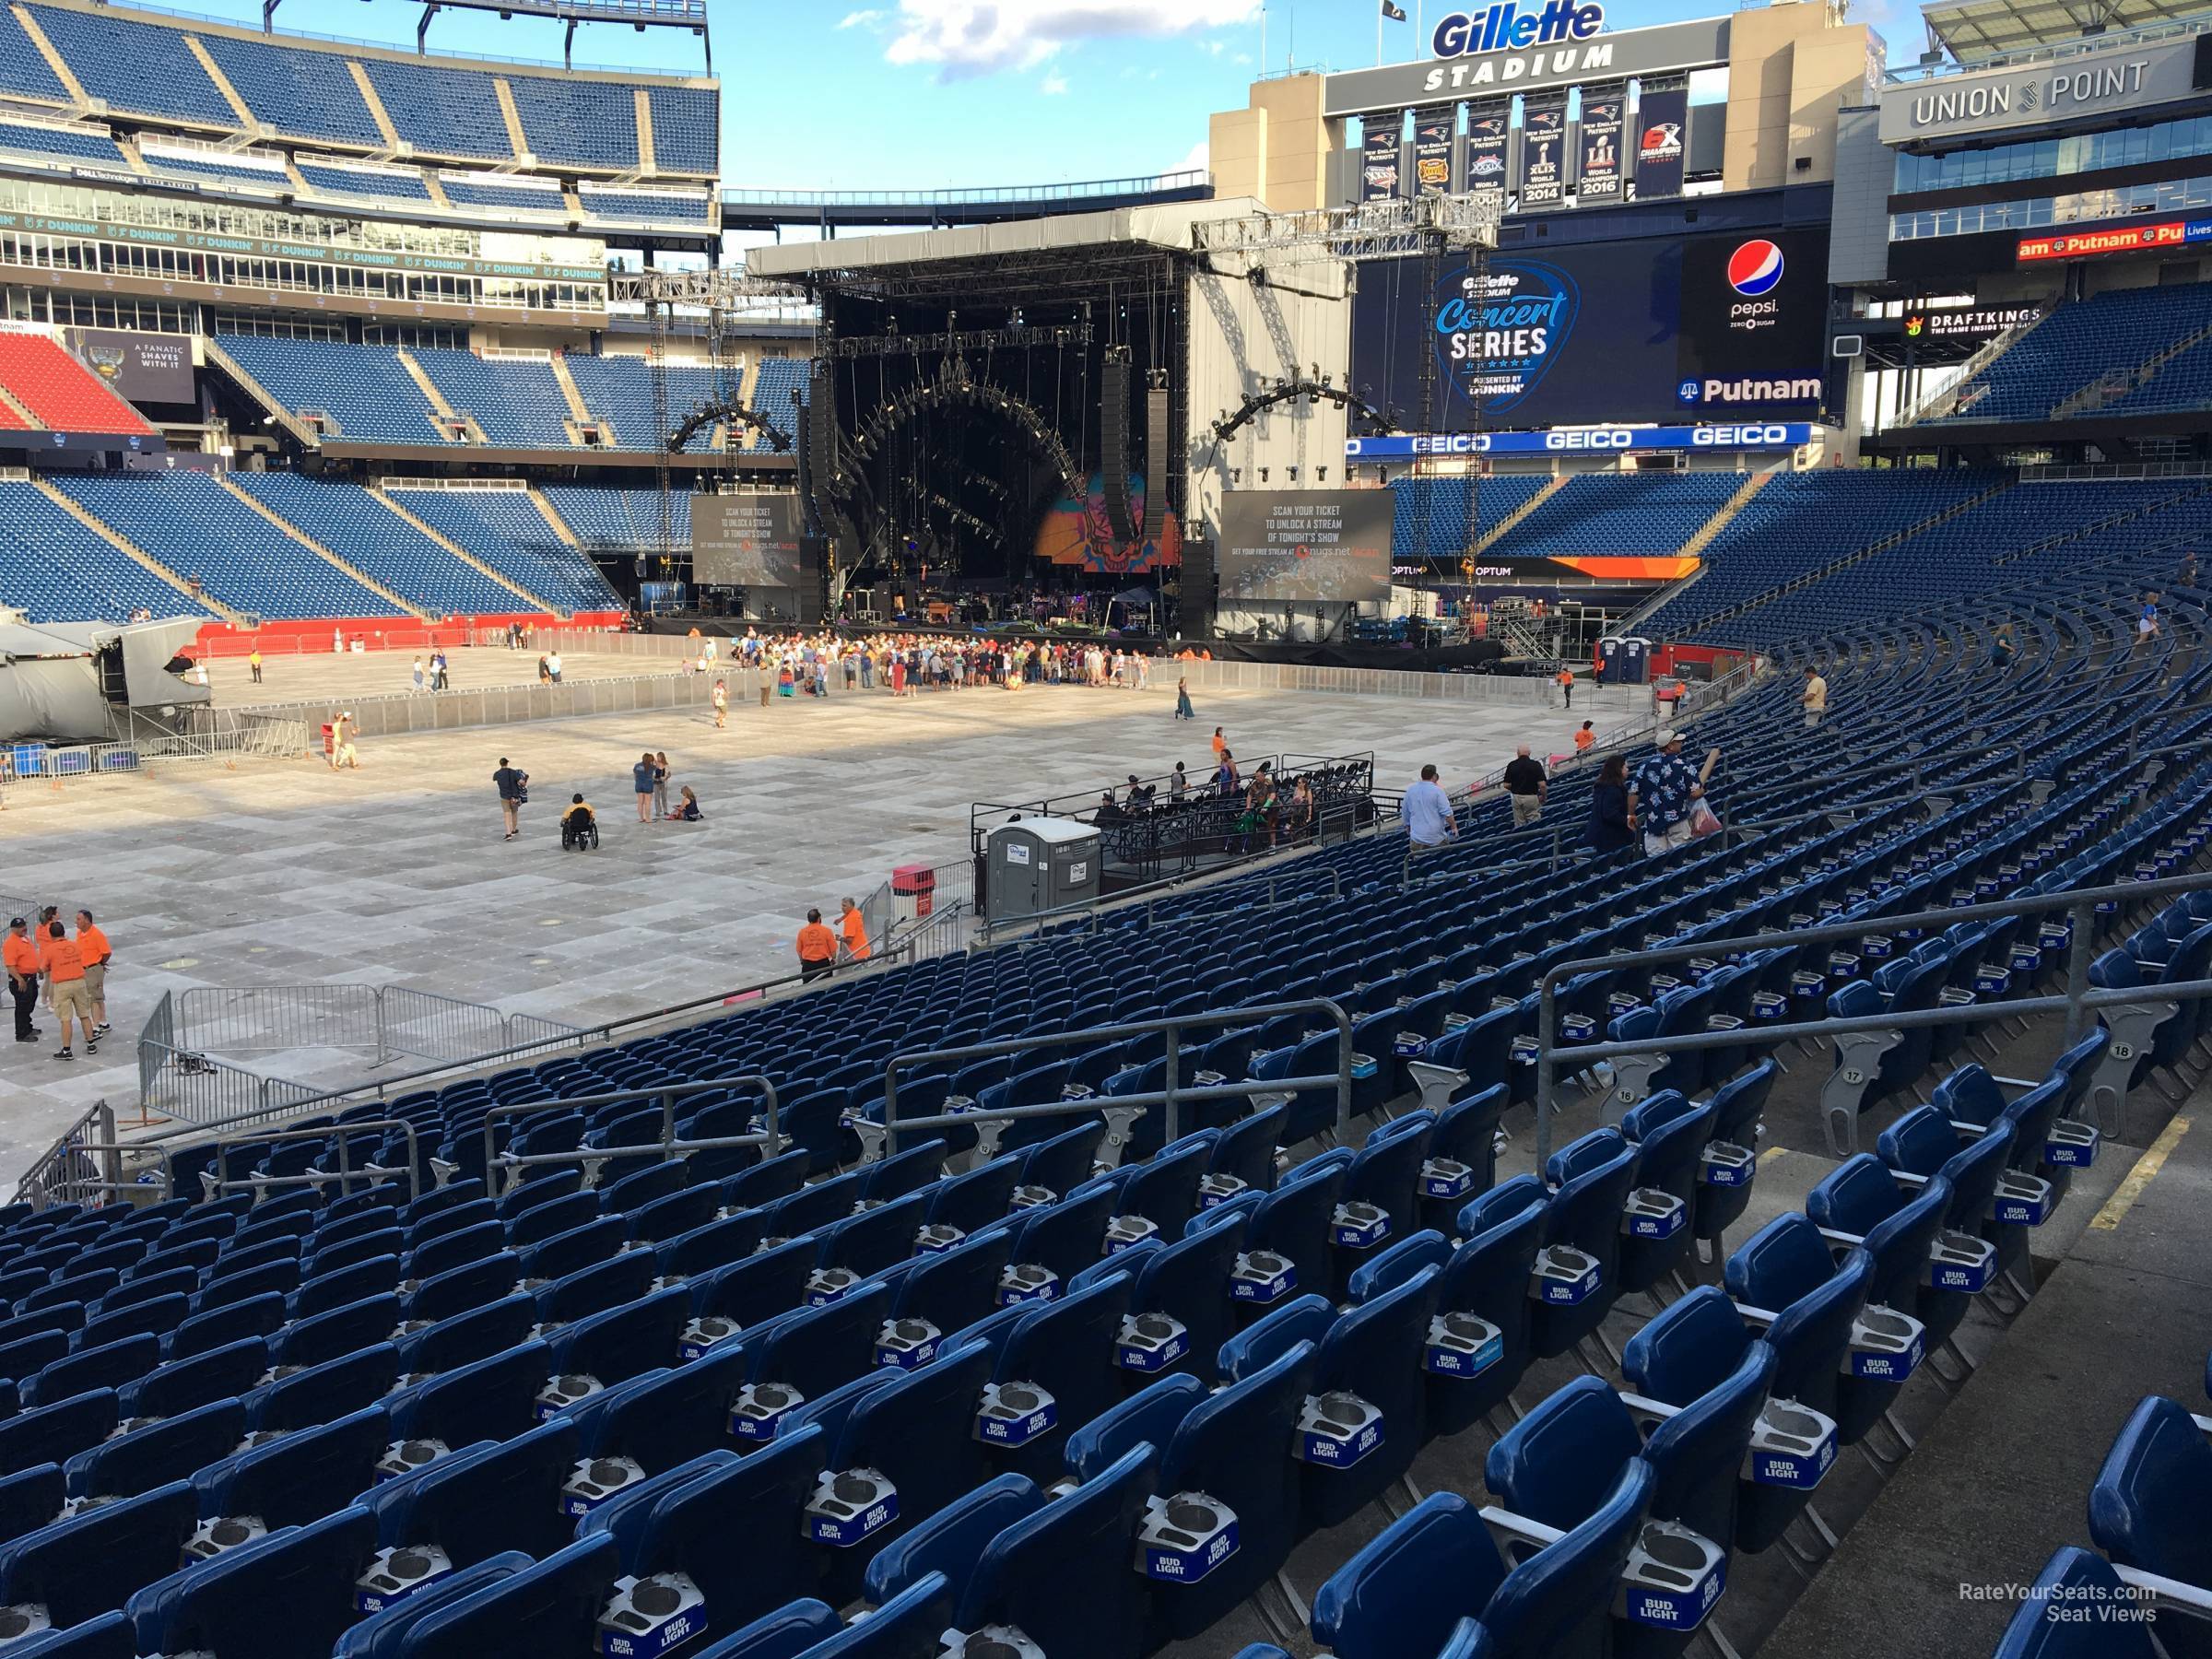 Gillette Stadium Section 134 Concert Seating - RateYourSeats.com